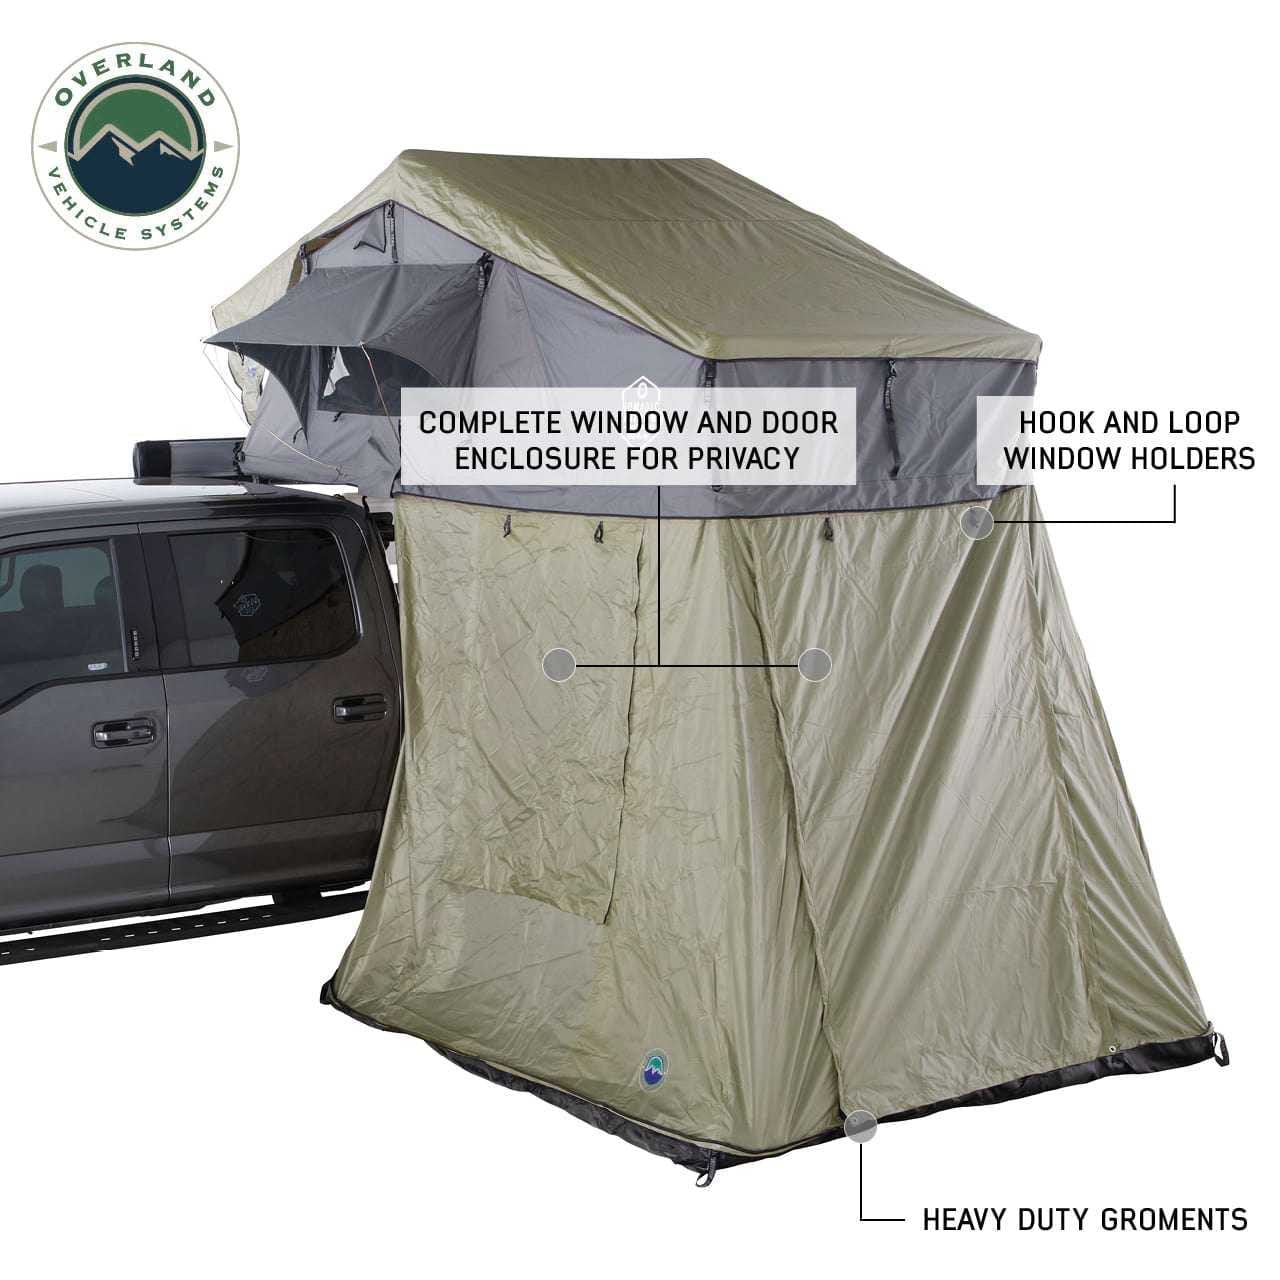 Nomadic 2 Extended Roof Top Tent Annex